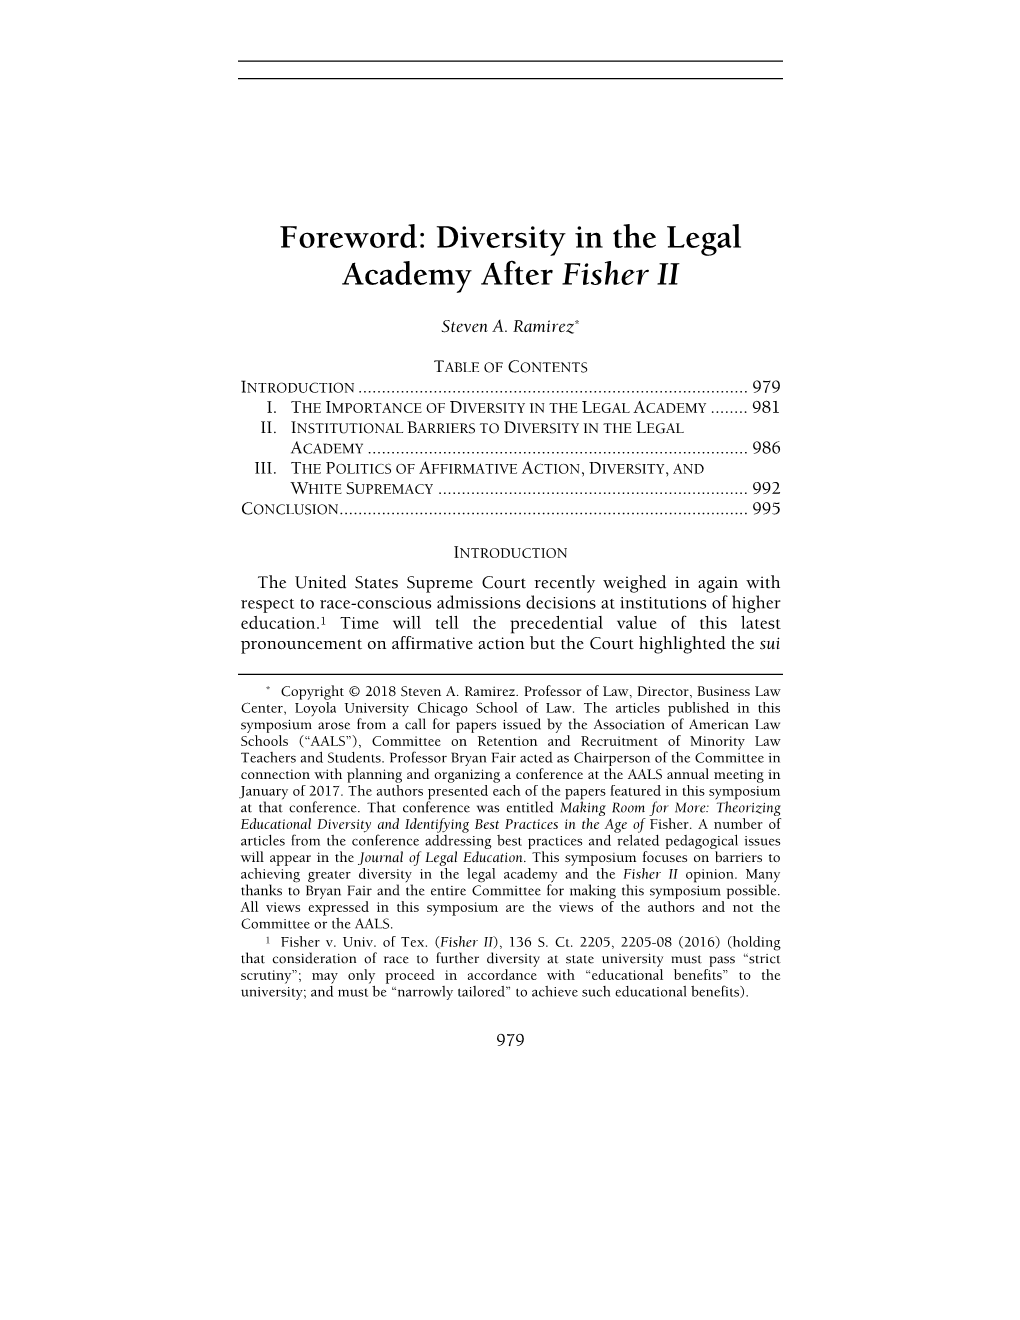 Diversity in the Legal Academy After Fisher II